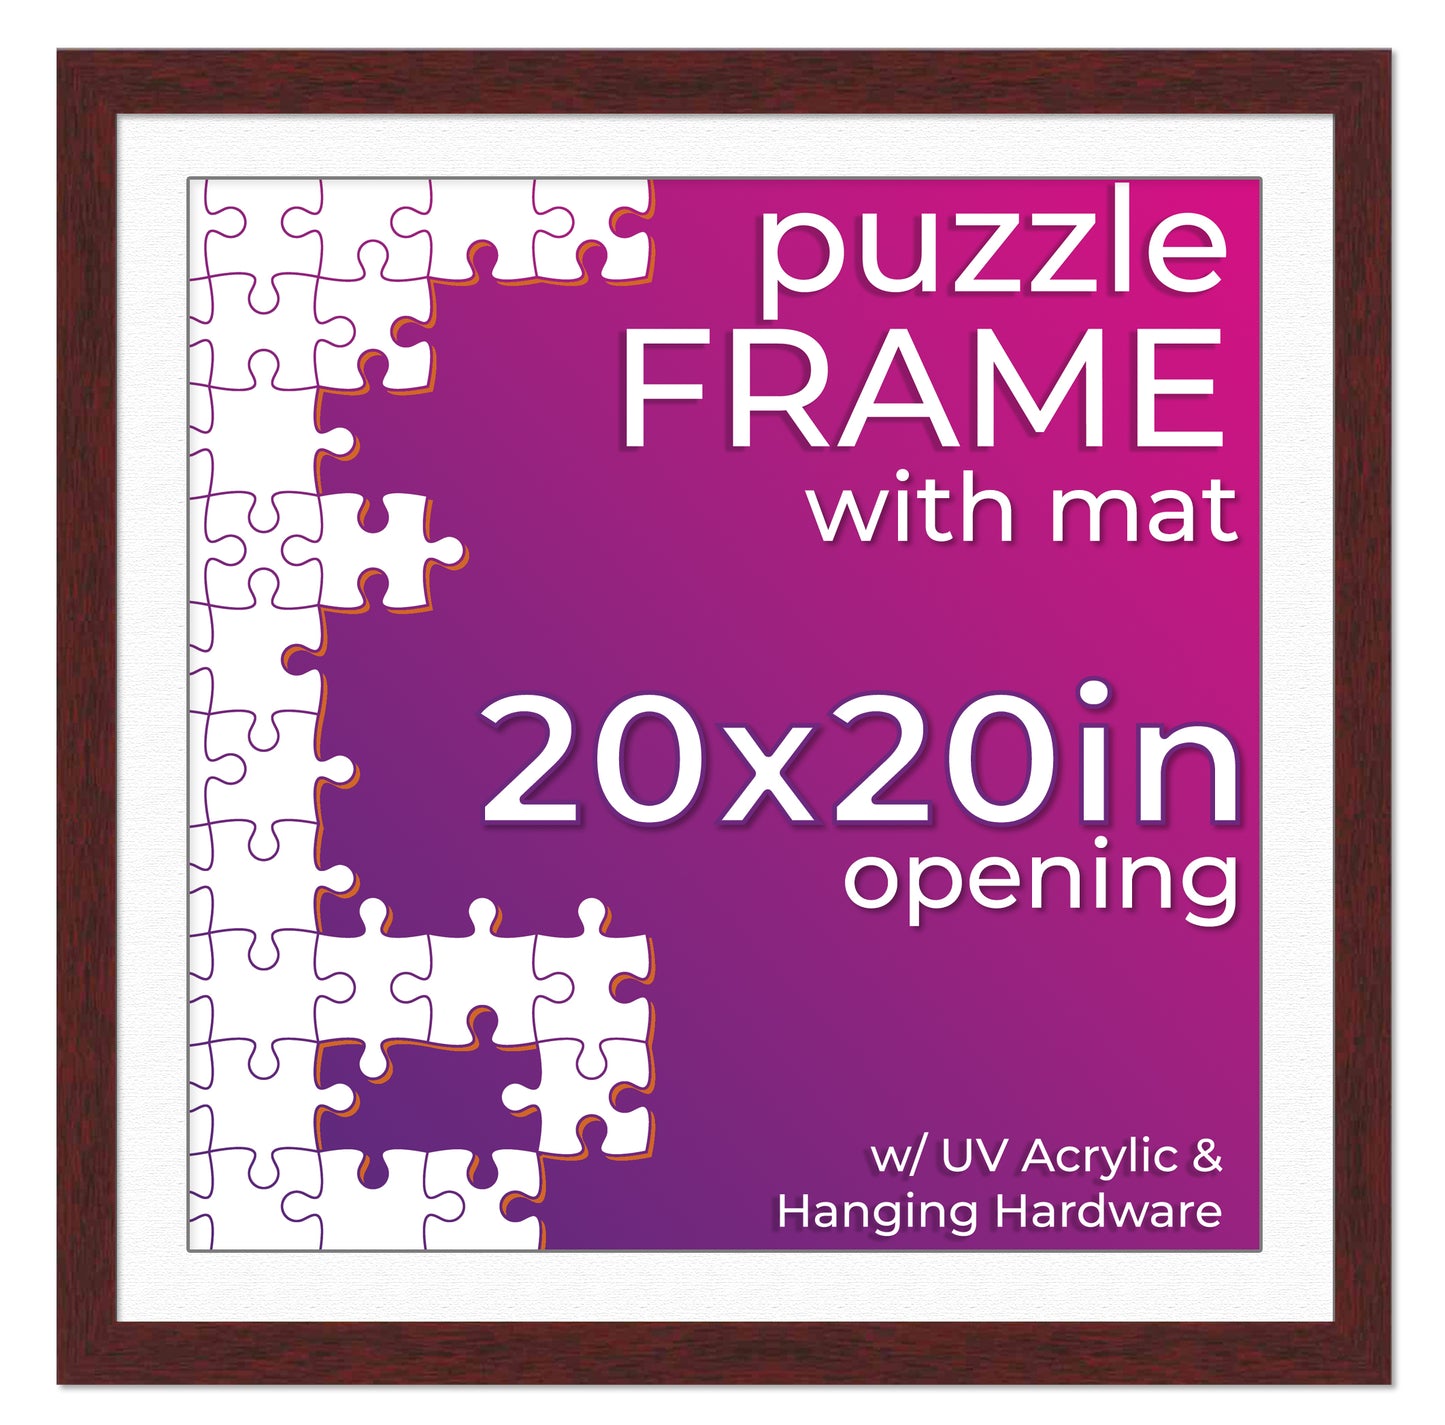 Brown Frame With White Mat for Jigsaw Puzzles